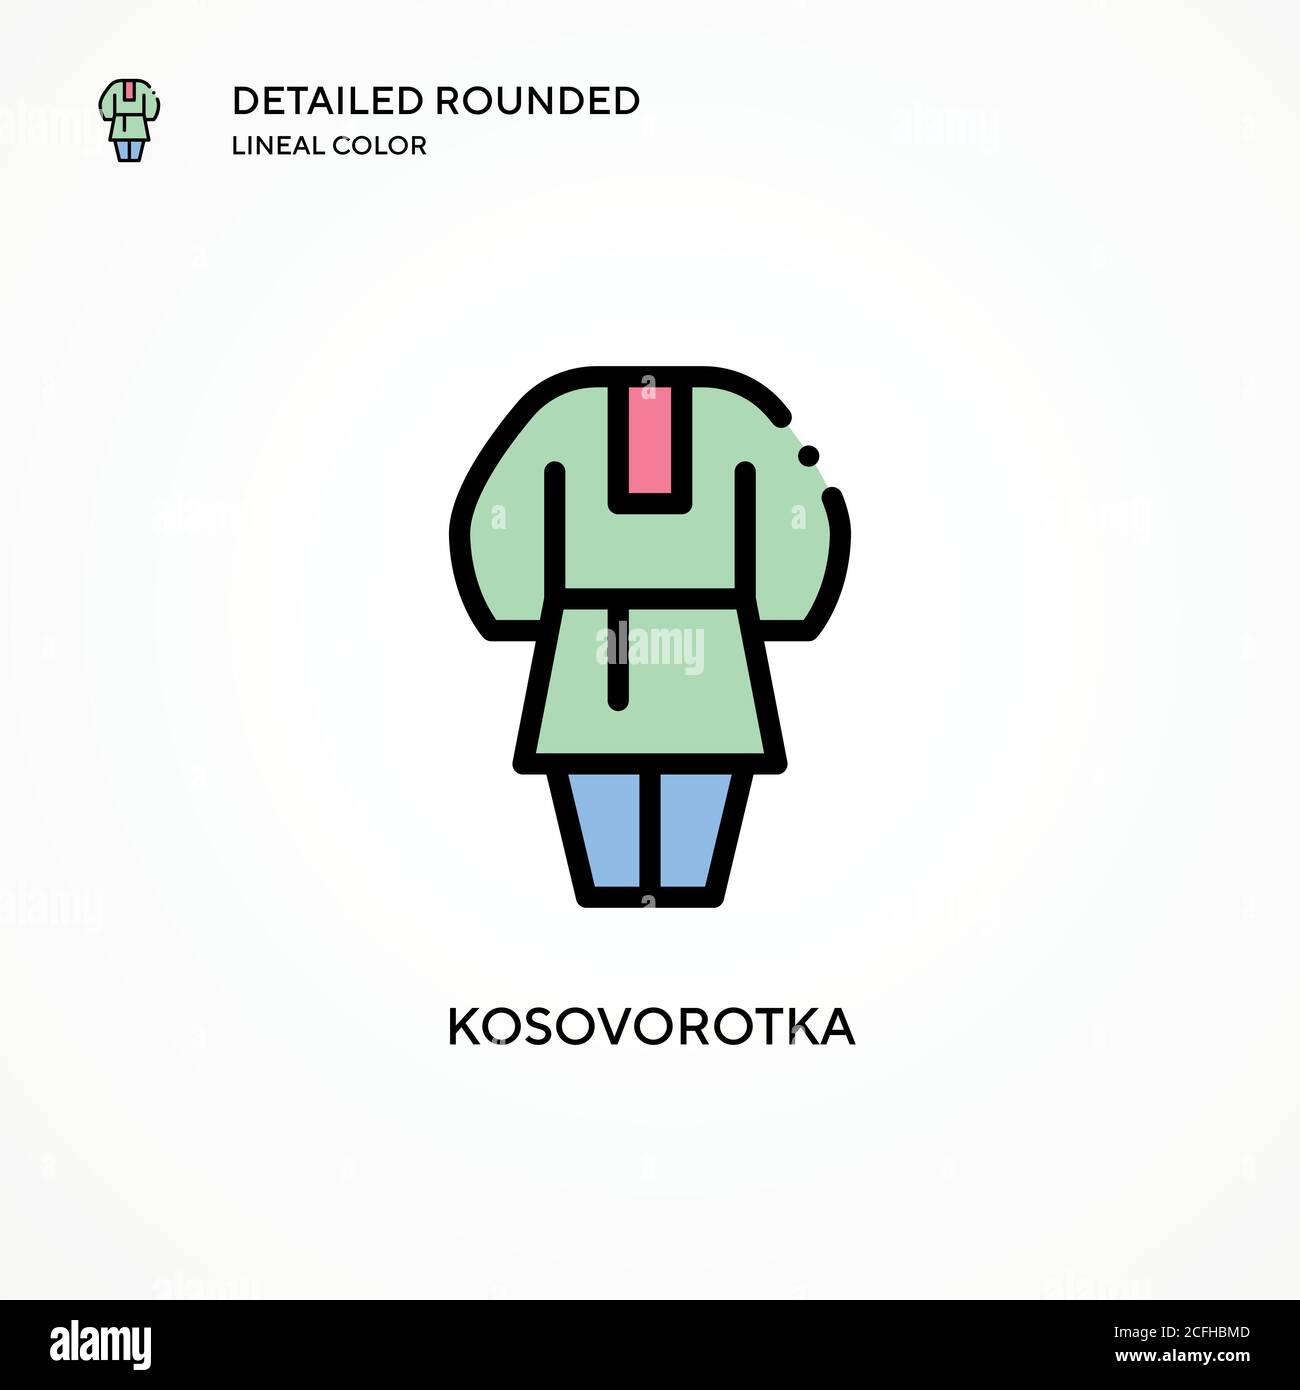 Kosovorotka vector icon. Modern vector illustration concepts. Easy to edit and customize. Stock Vector